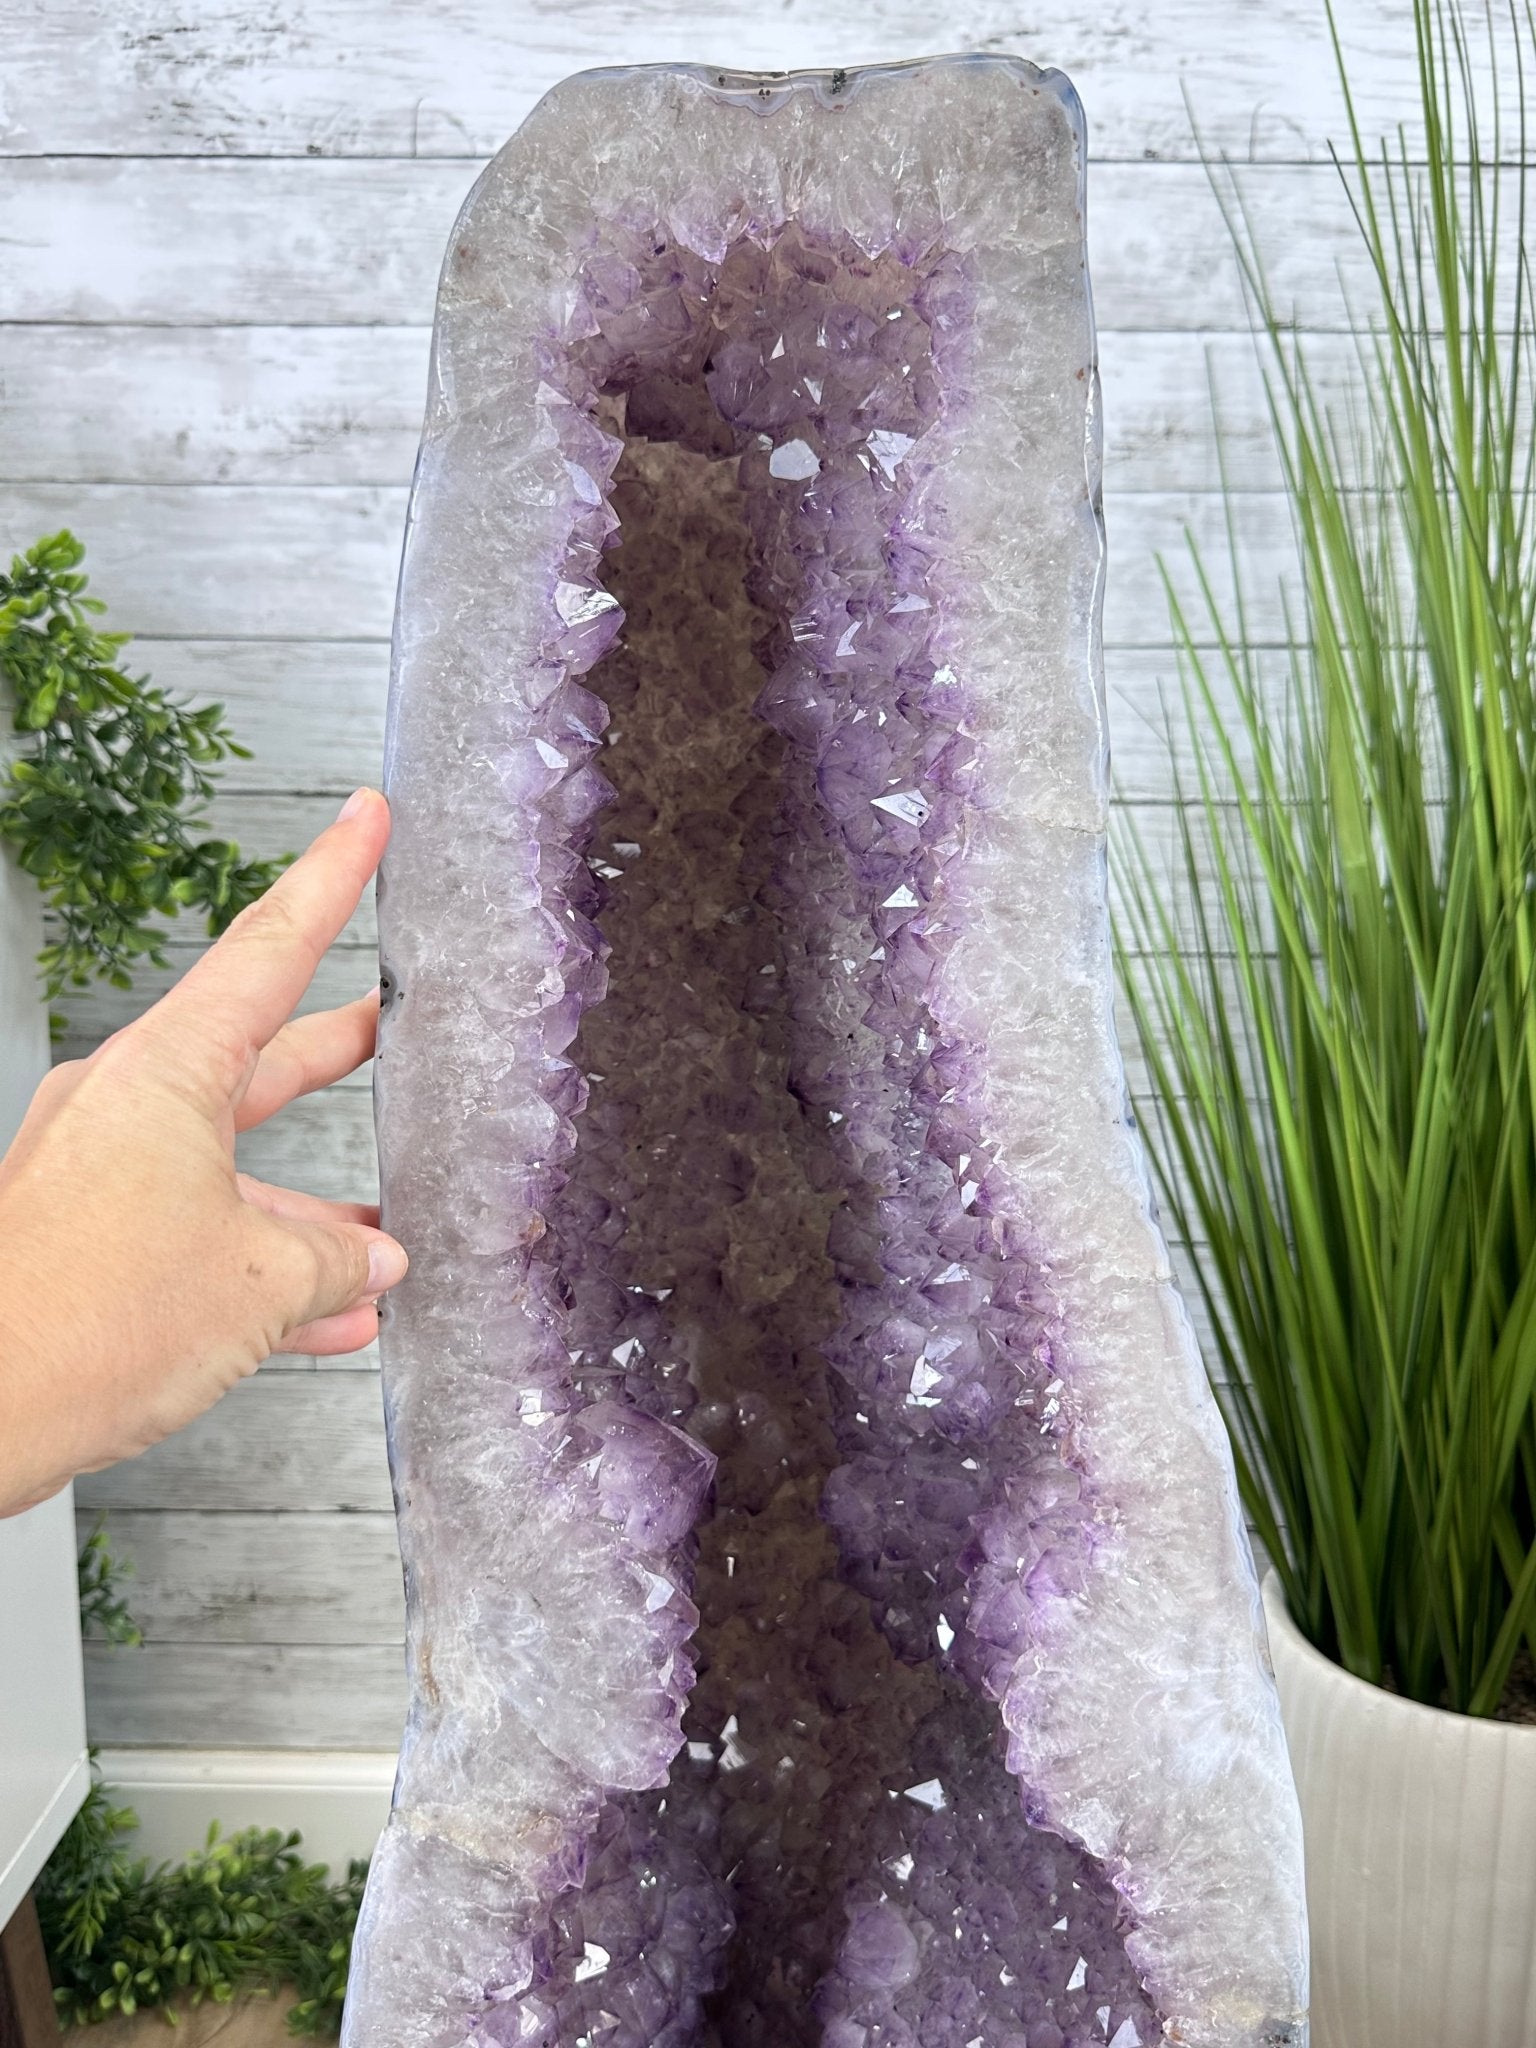 Extra Quality Polished Brazilian Amethyst Cathedral, 150.6 lbs & 35.25" tall Model #5602-0184 by Brazil Gems - Brazil GemsBrazil GemsExtra Quality Polished Brazilian Amethyst Cathedral, 150.6 lbs & 35.25" tall Model #5602-0184 by Brazil GemsPolished Cathedrals5602-0184